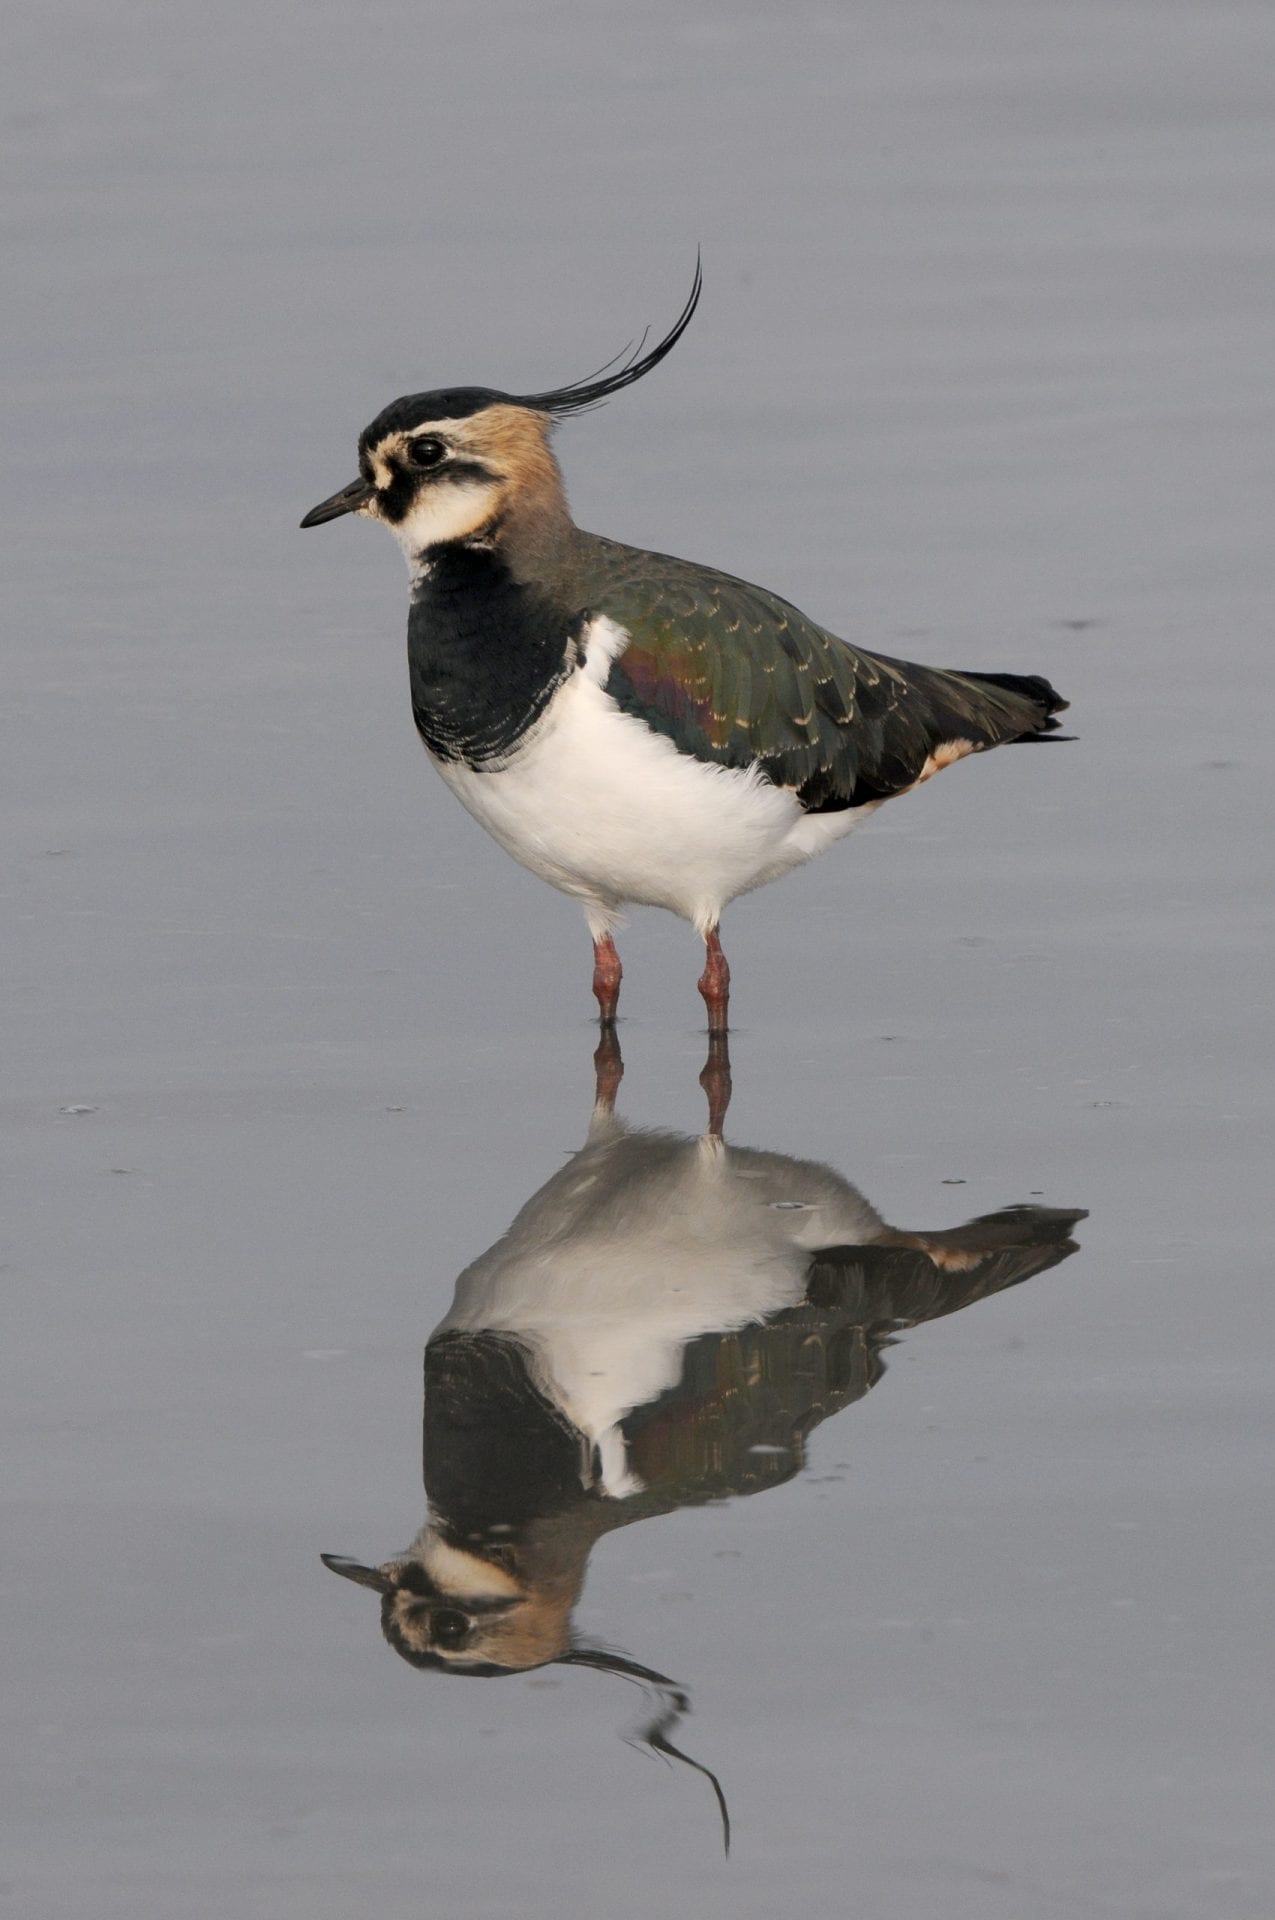 Lapwing standing in water